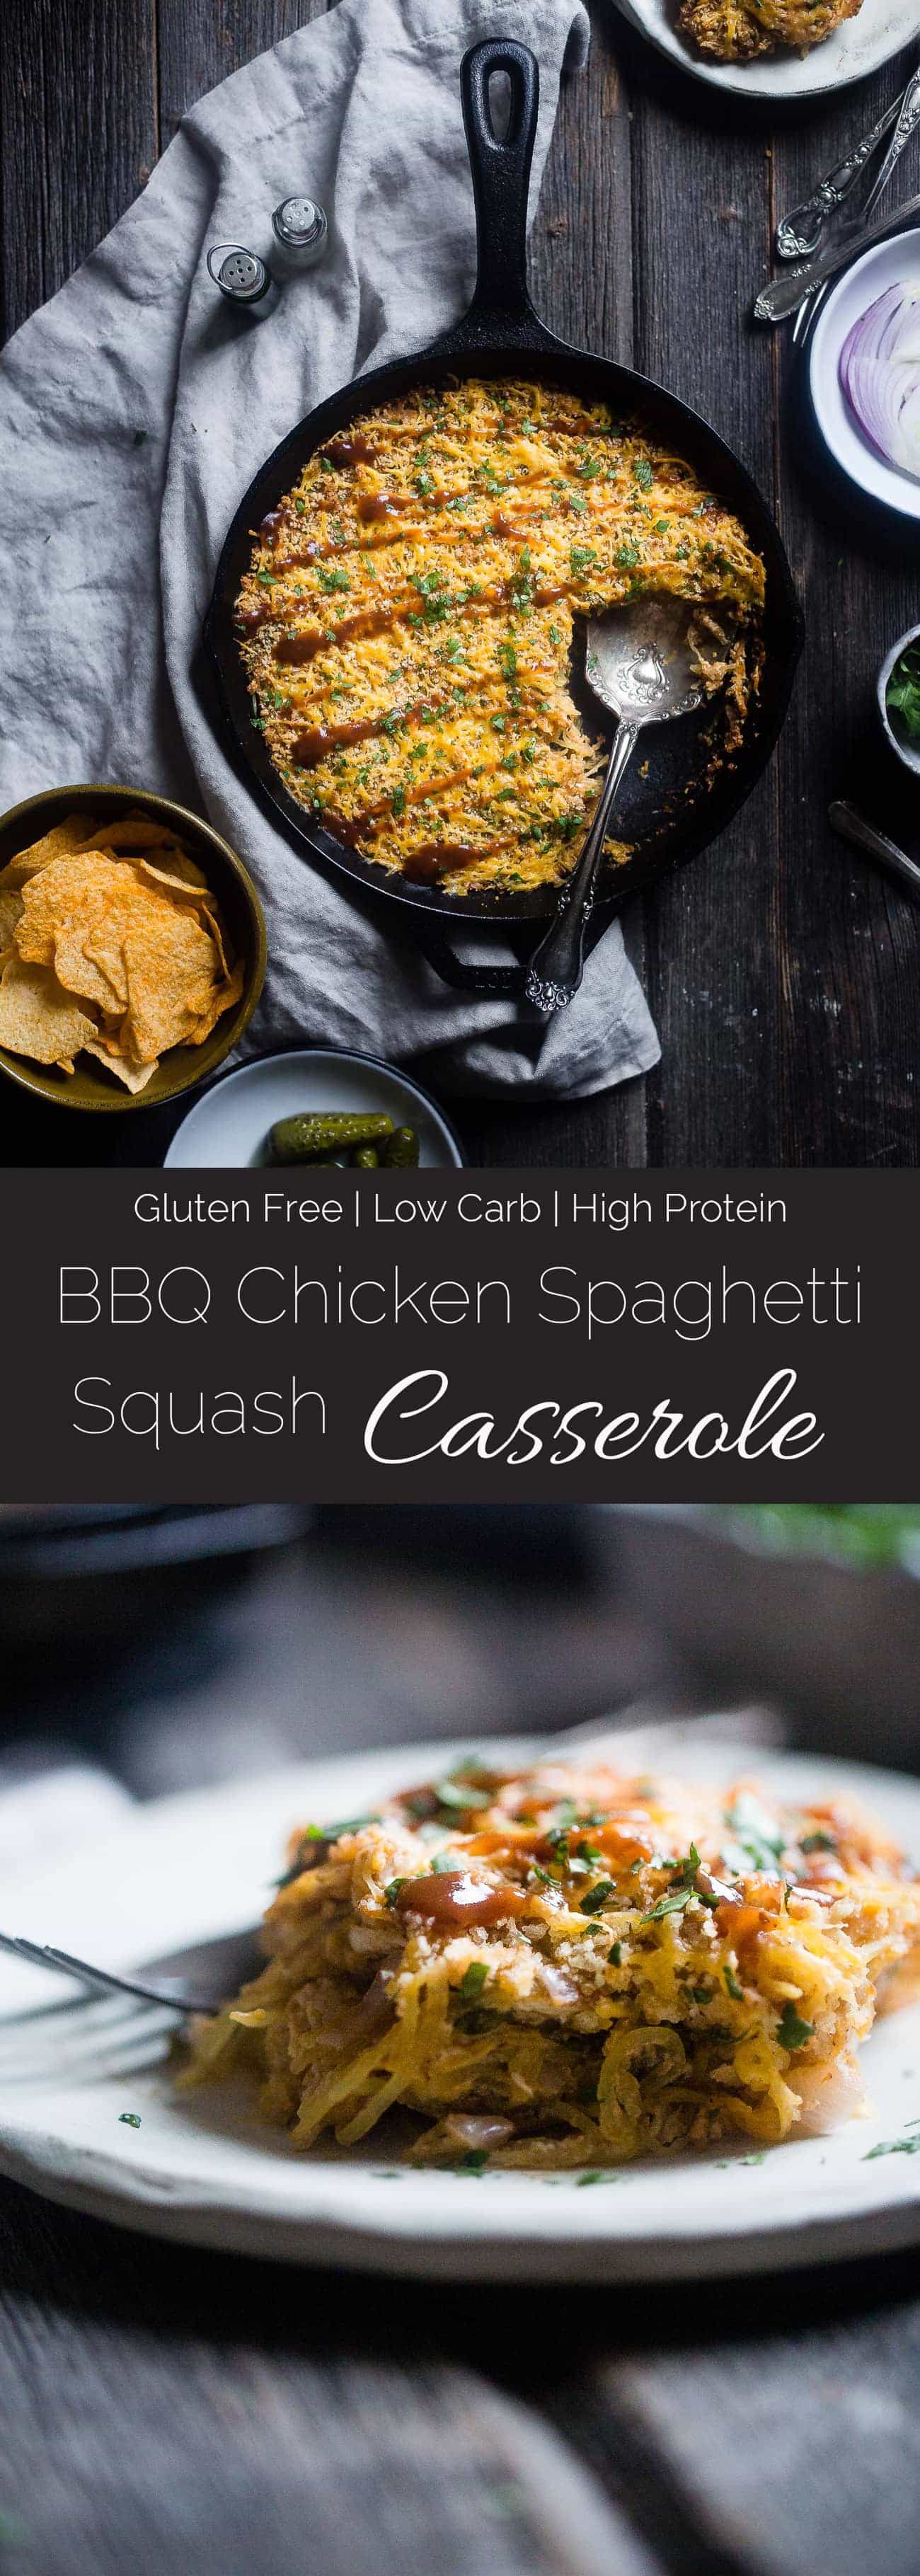 BBQ Baked Chicken Spaghetti Squash Casserole - This low carb, gluten free casserole is cheesy, flavorful and only 214 calories! It's a kid-friendly, weeknight meal that the whole family will love! | Foodfaithfitness.com | @FoodfaithFit |low carb spaghetti squash casserole. cheesy spaghetti squash casserole. baked spaghetti squash casserole. spaghetti squash casserole recipes. weight watchers spaghetti squash casserole. healthy spaghetti squash casserole. kid friendly dinners. healthy bbq chicken. Greek yogurt spaghetti squash casserole